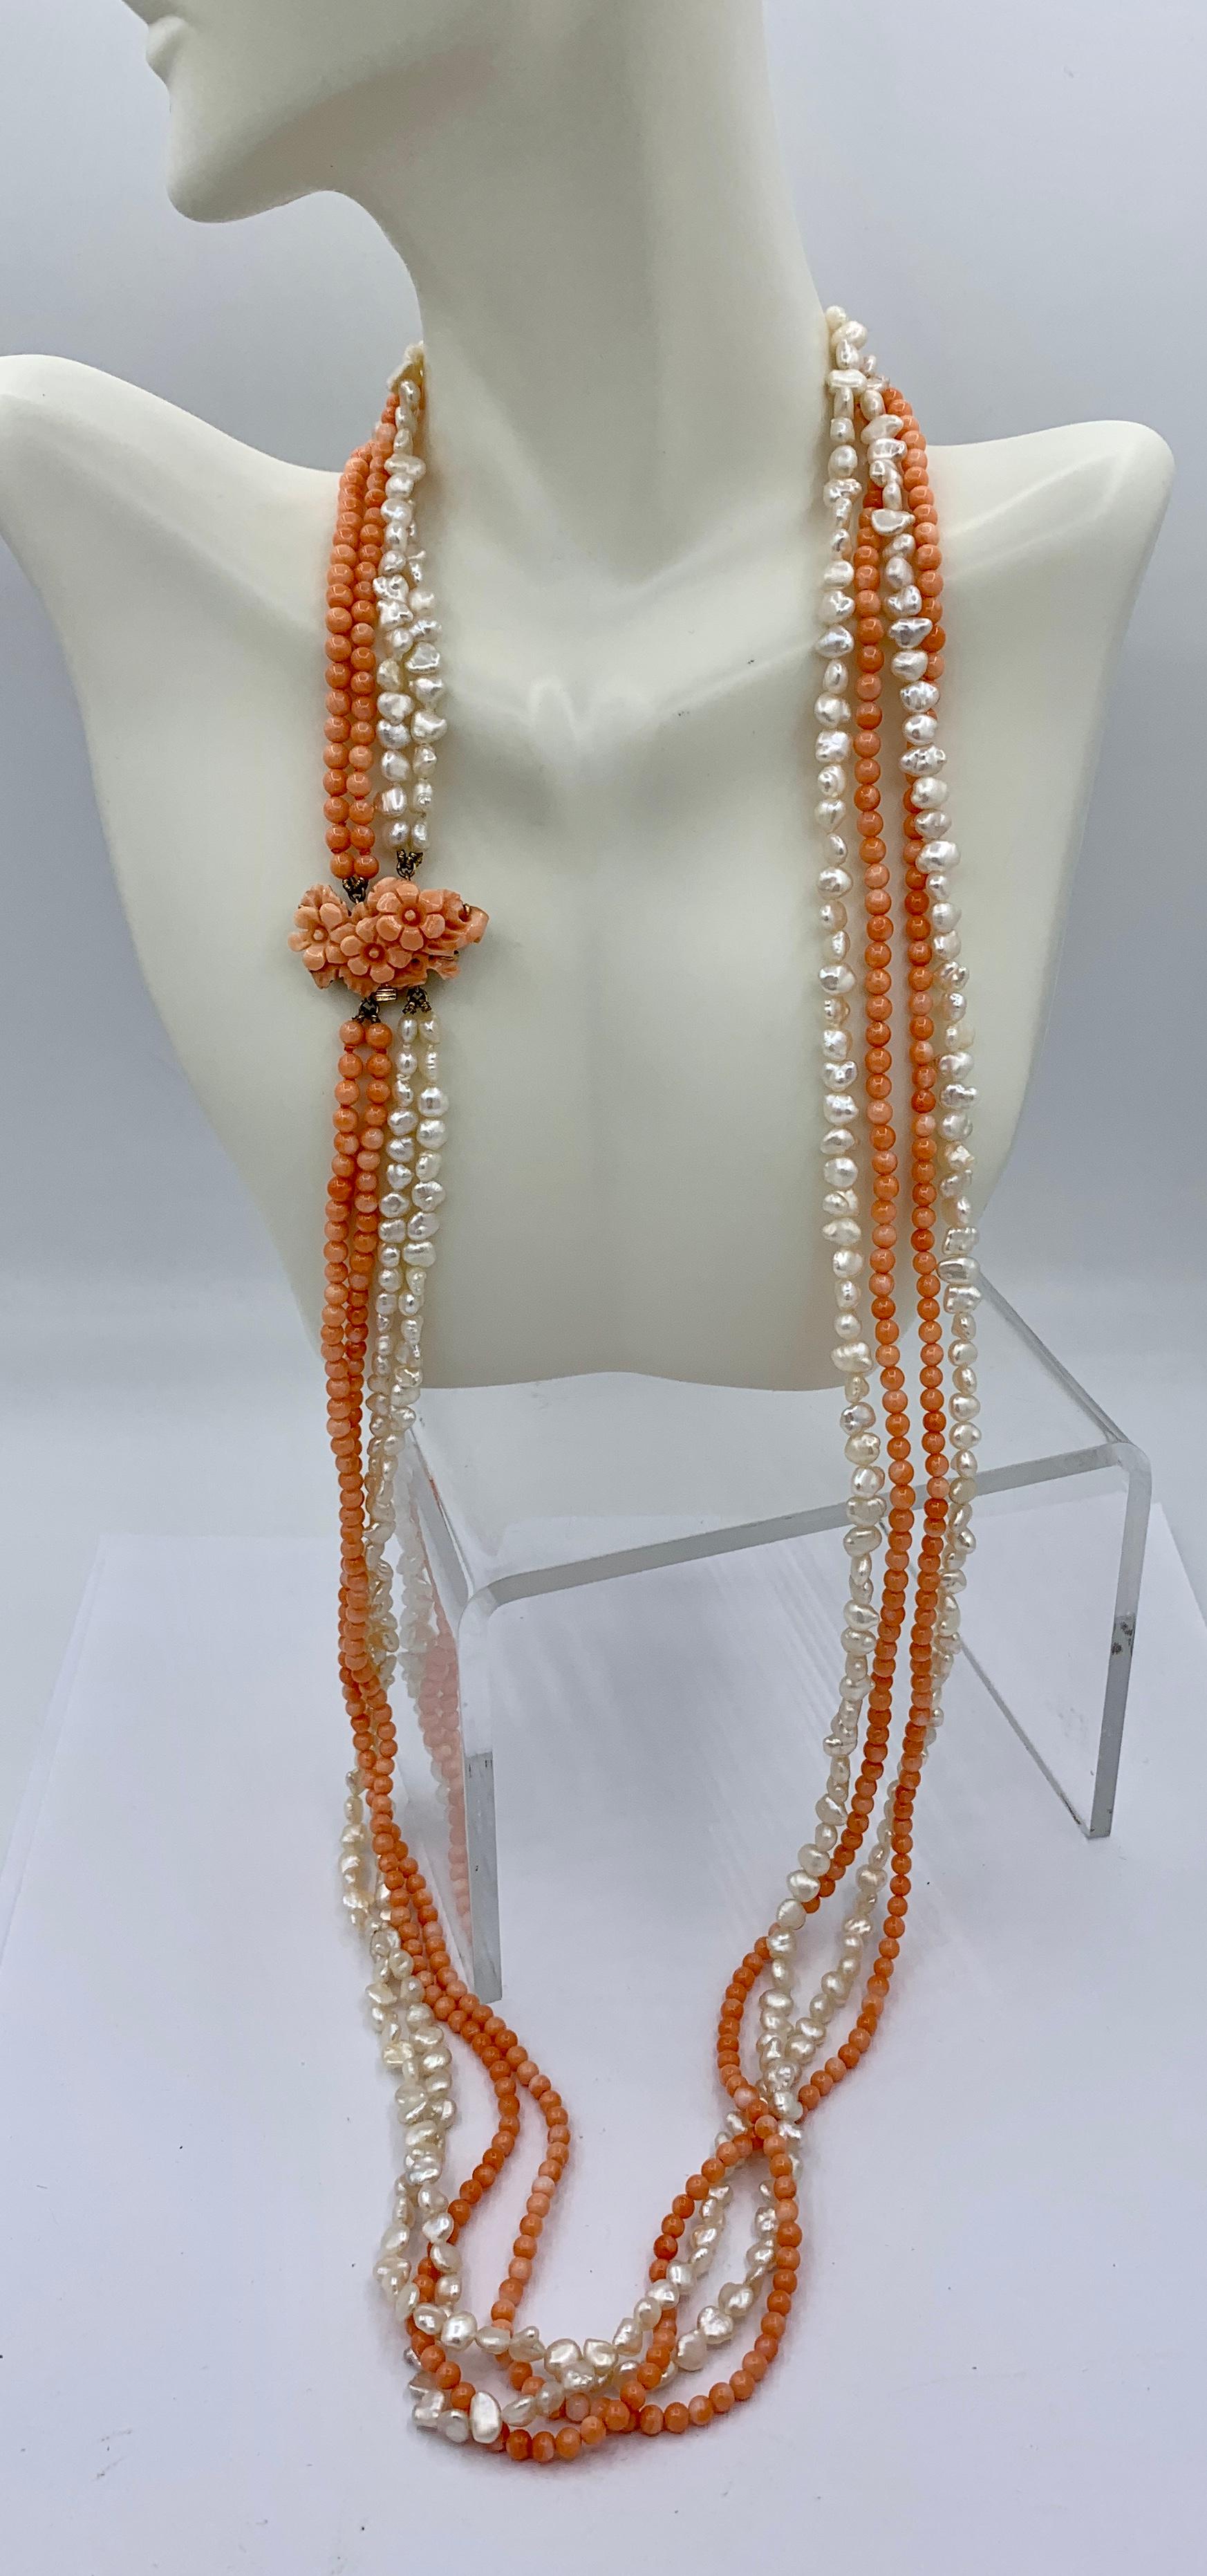 Bead 32 Inch Coral Flower Pearl Necklace 14 Karat Gold 4 Strand Hand Carved For Sale